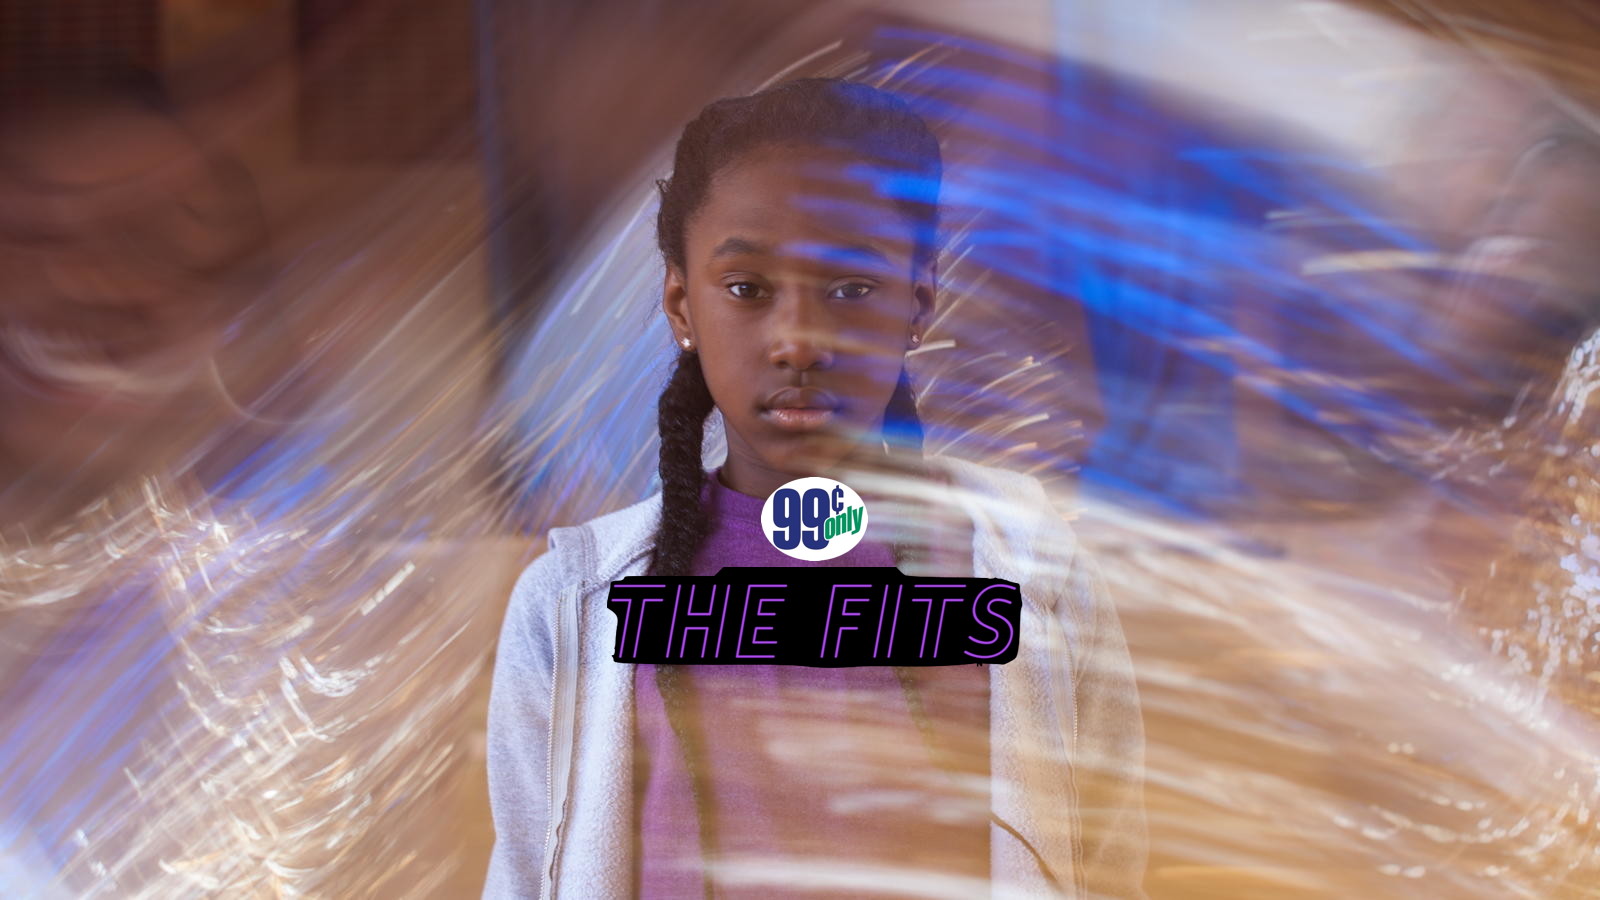 Geek insider, geekinsider, geekinsider. Com,, the (other) itunes $0. 99 movie of the week: 'the fits', entertainment